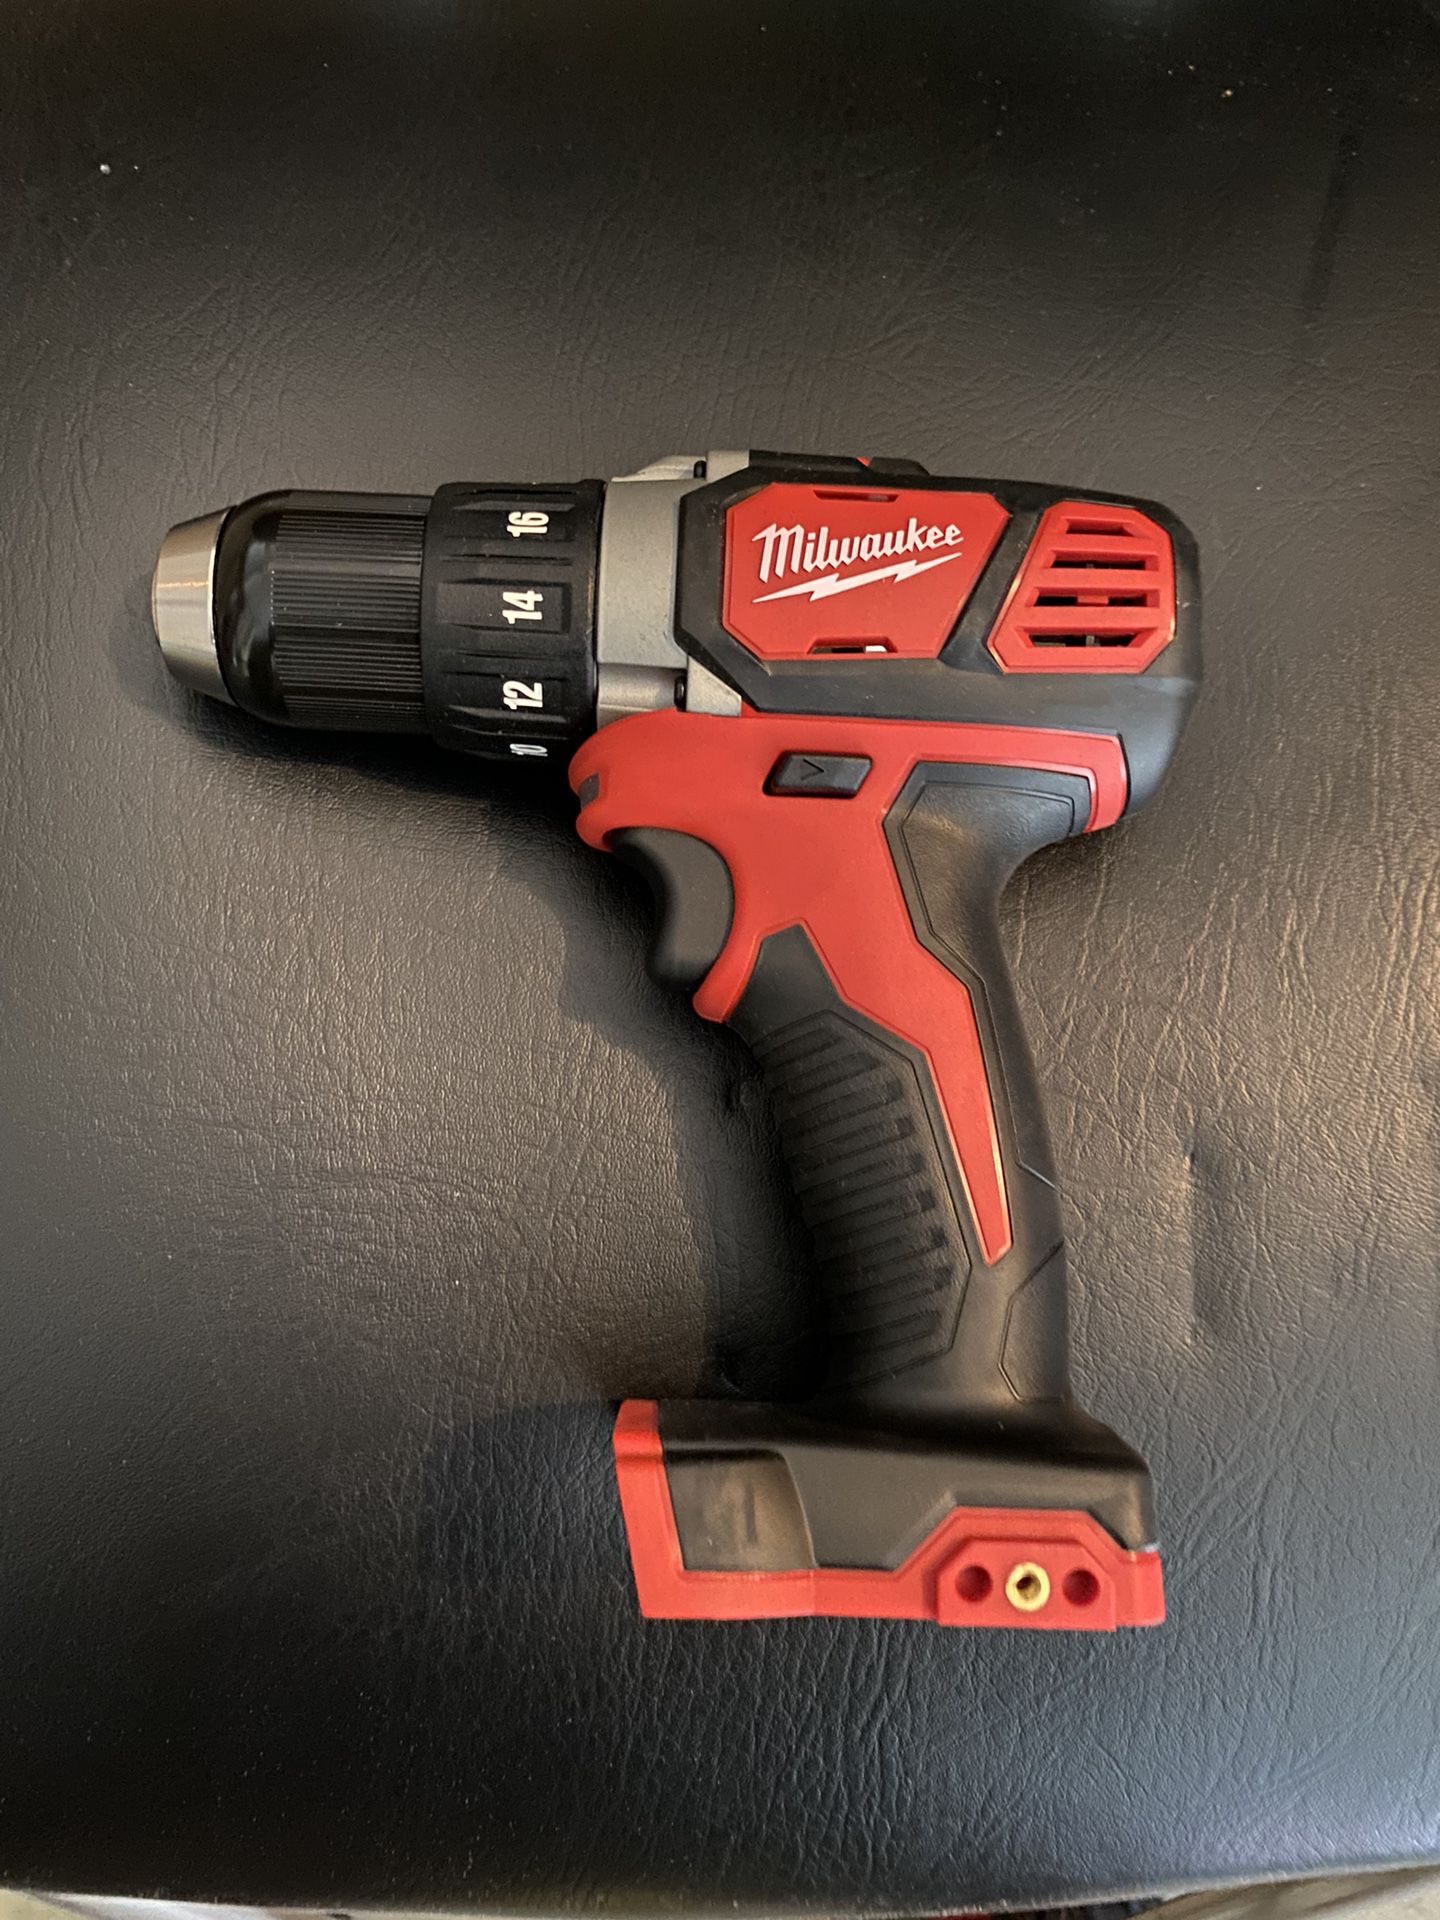 M18 Milwaukee Drill(Tool Only)